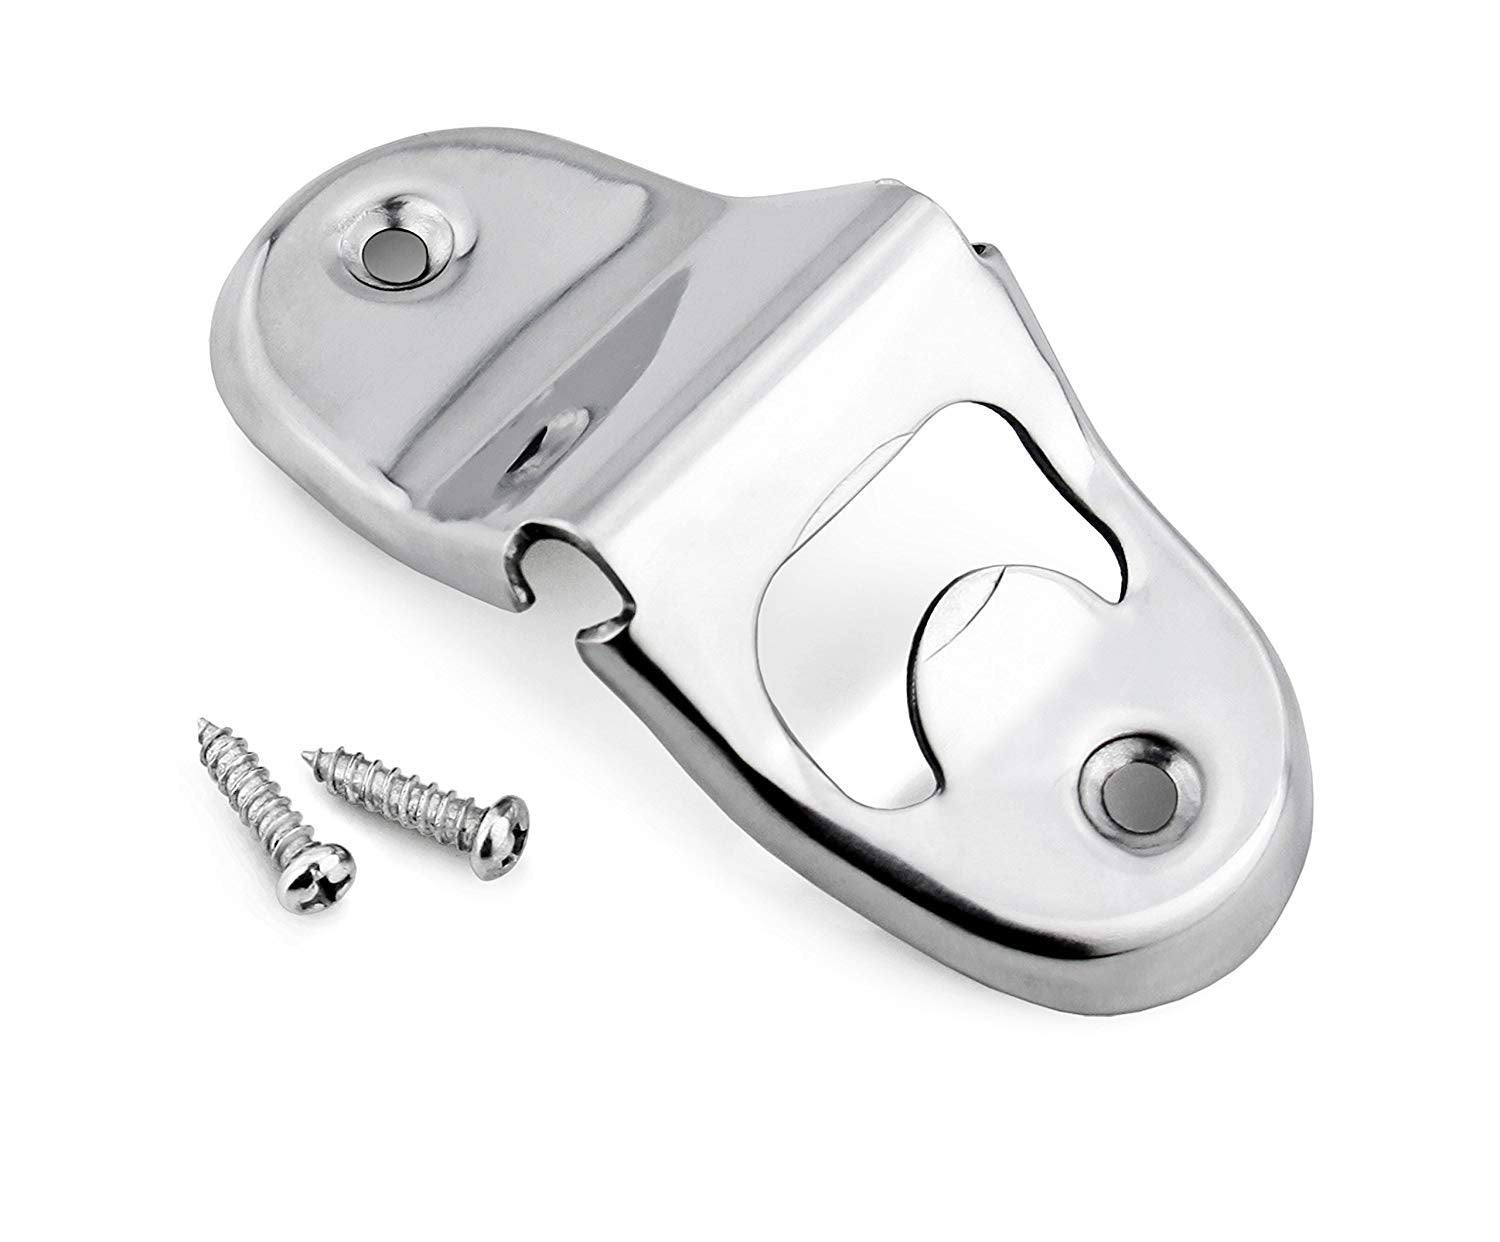 Stainless Steel Straight Bottle Opener, Sturdy And Durable Beer